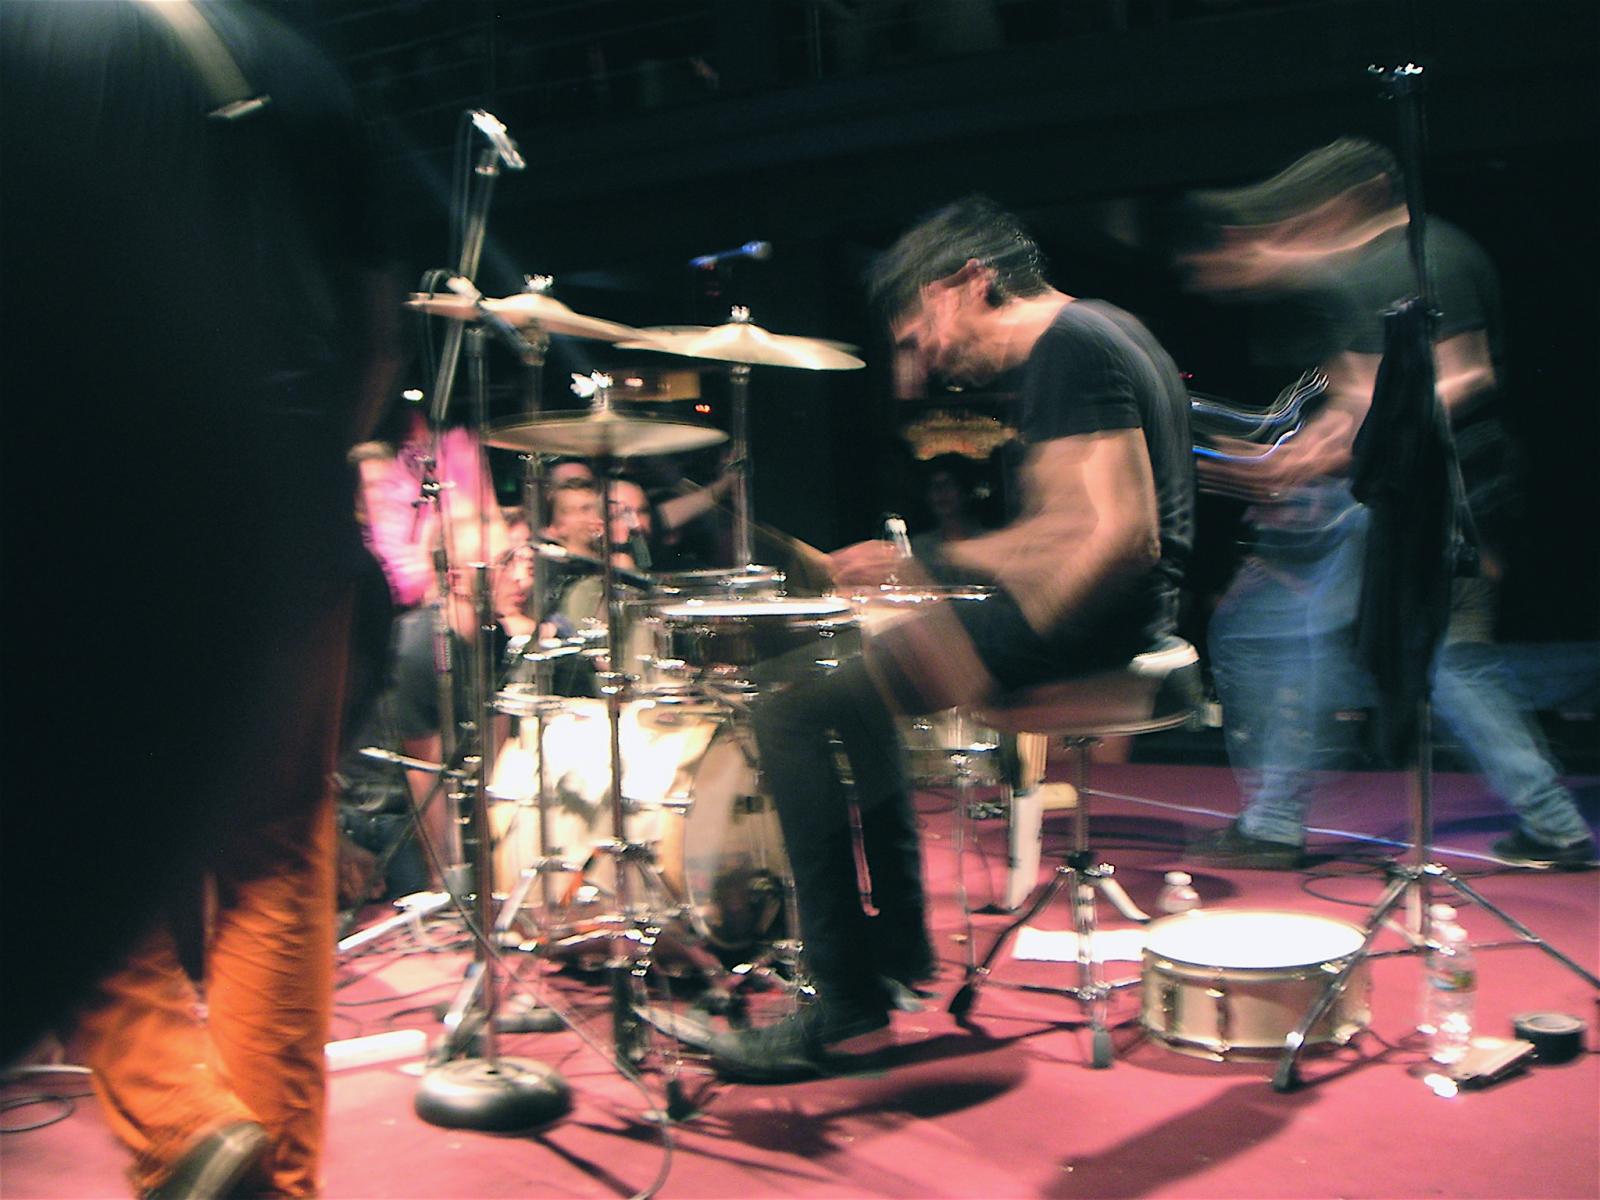 drummer playing drums in front of others at the event